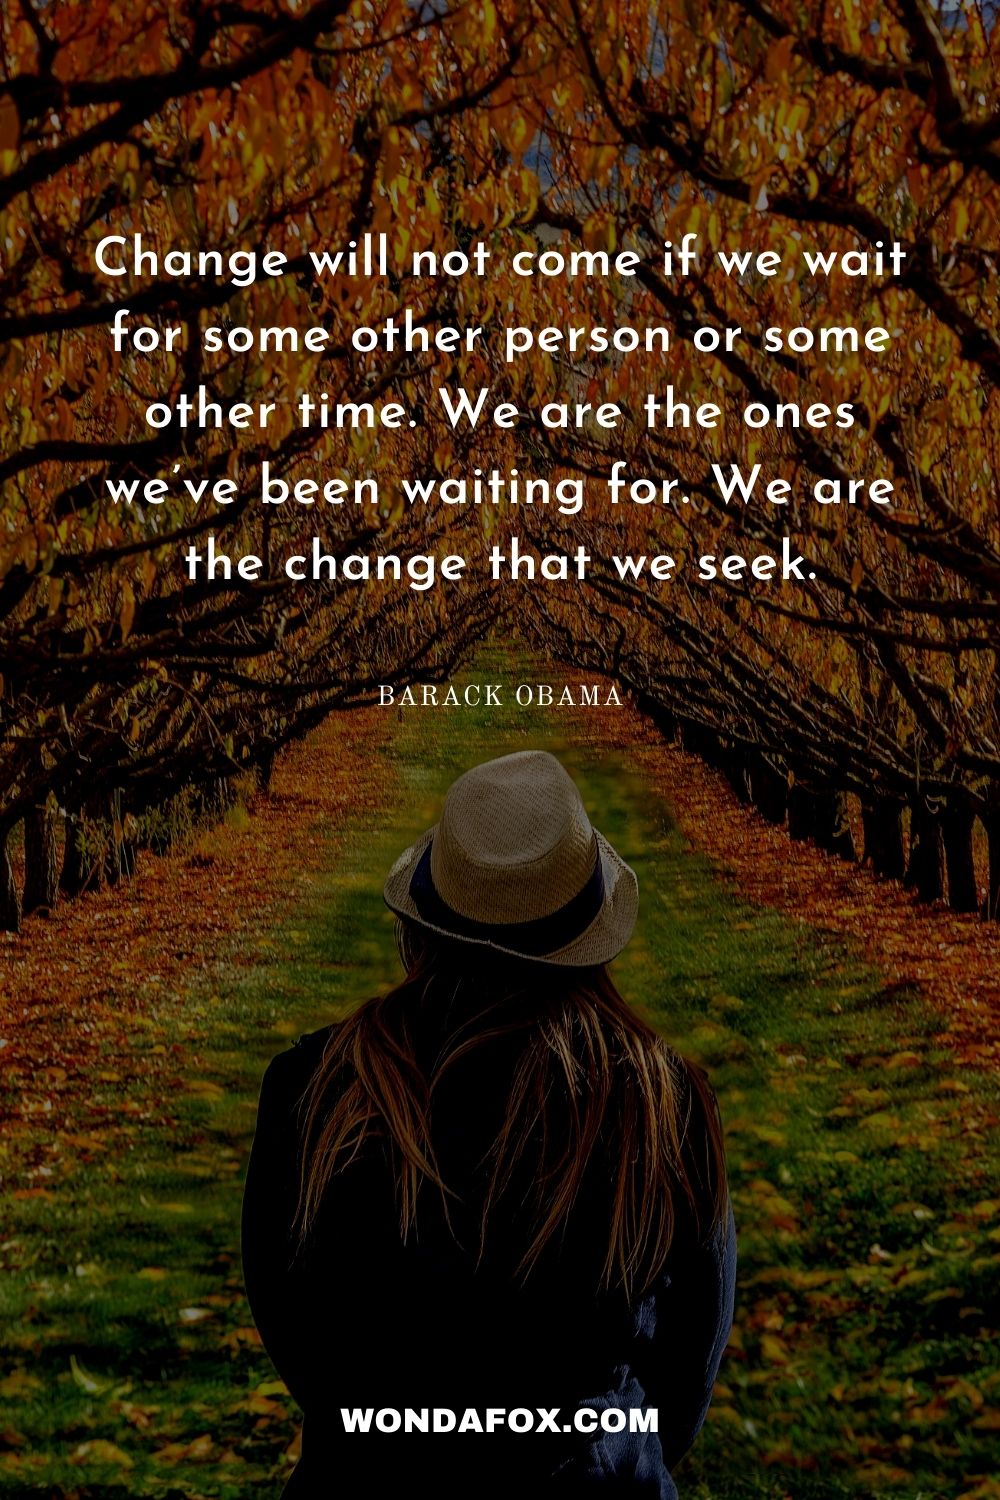 Change will not come if we wait for some other person or some other time. We are the ones we’ve been waiting for. We are the change that we seek.